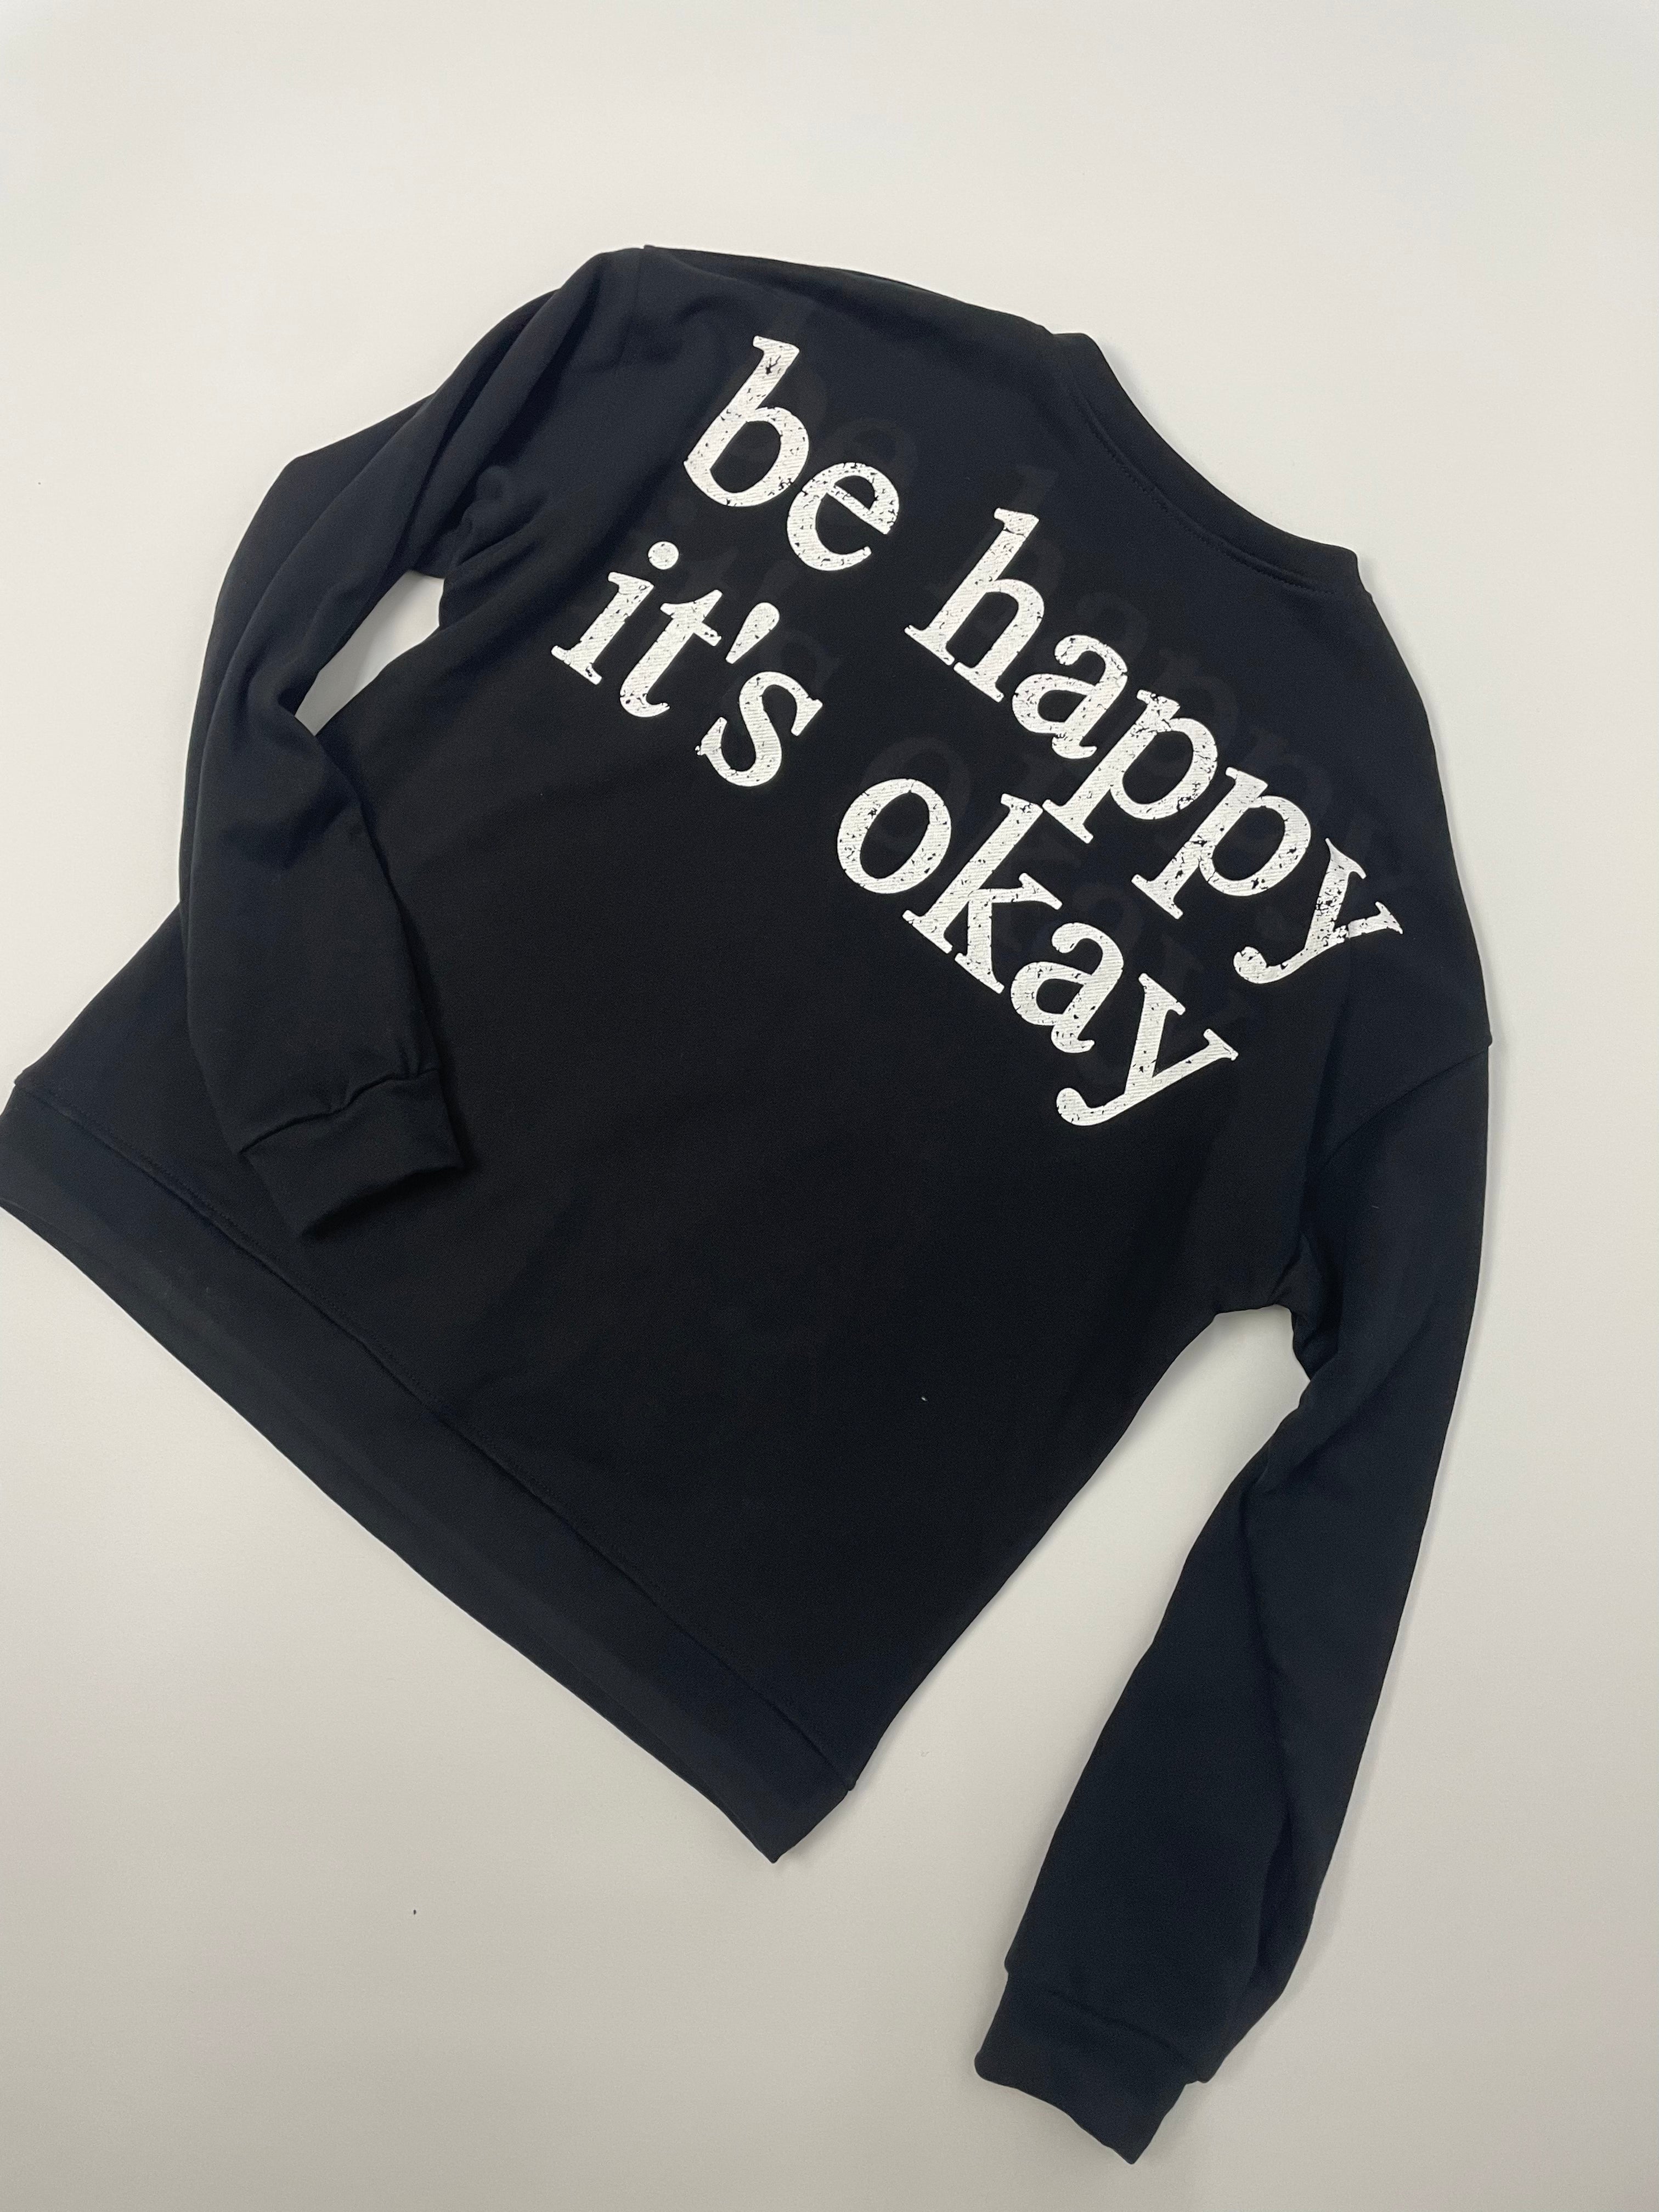 Sweater Be Happy vers. Farben